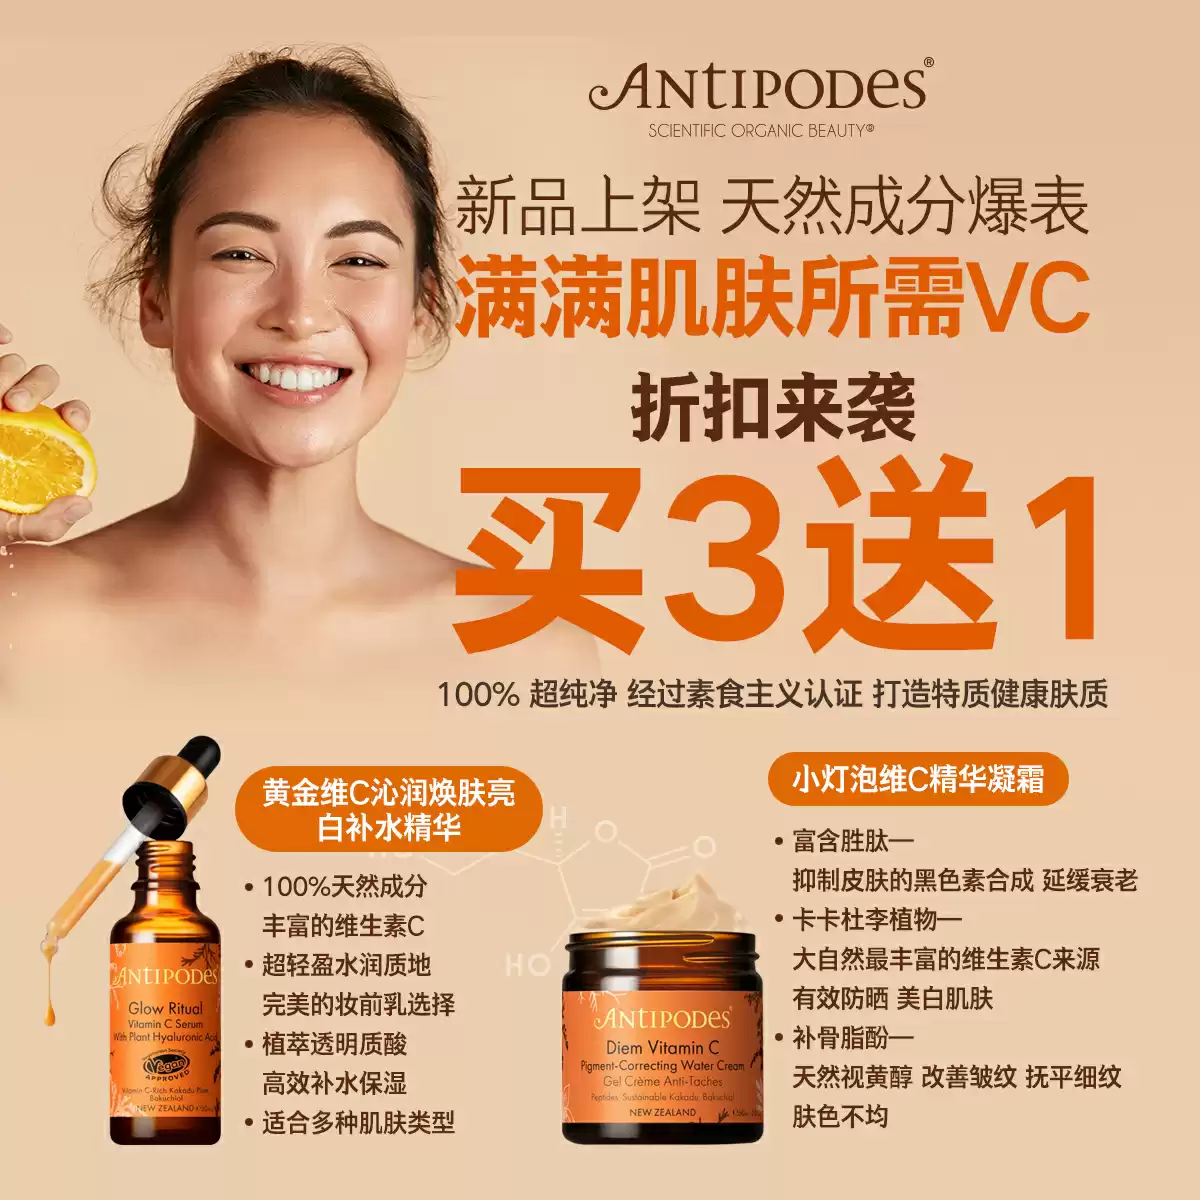 Antipodes new products buy 3 get 1for free